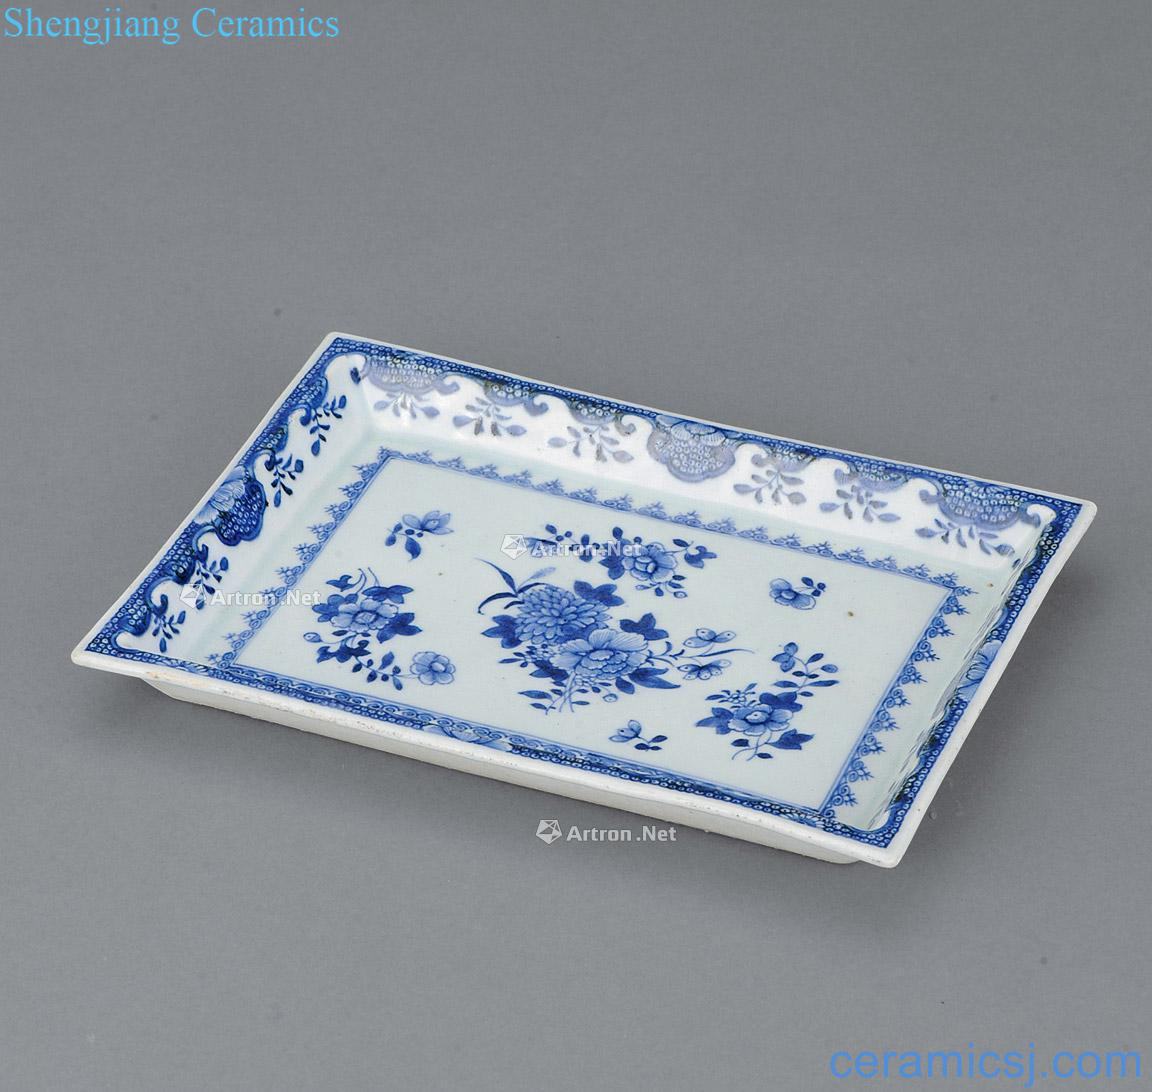 Qing dynasty blue and white flower grain square plate